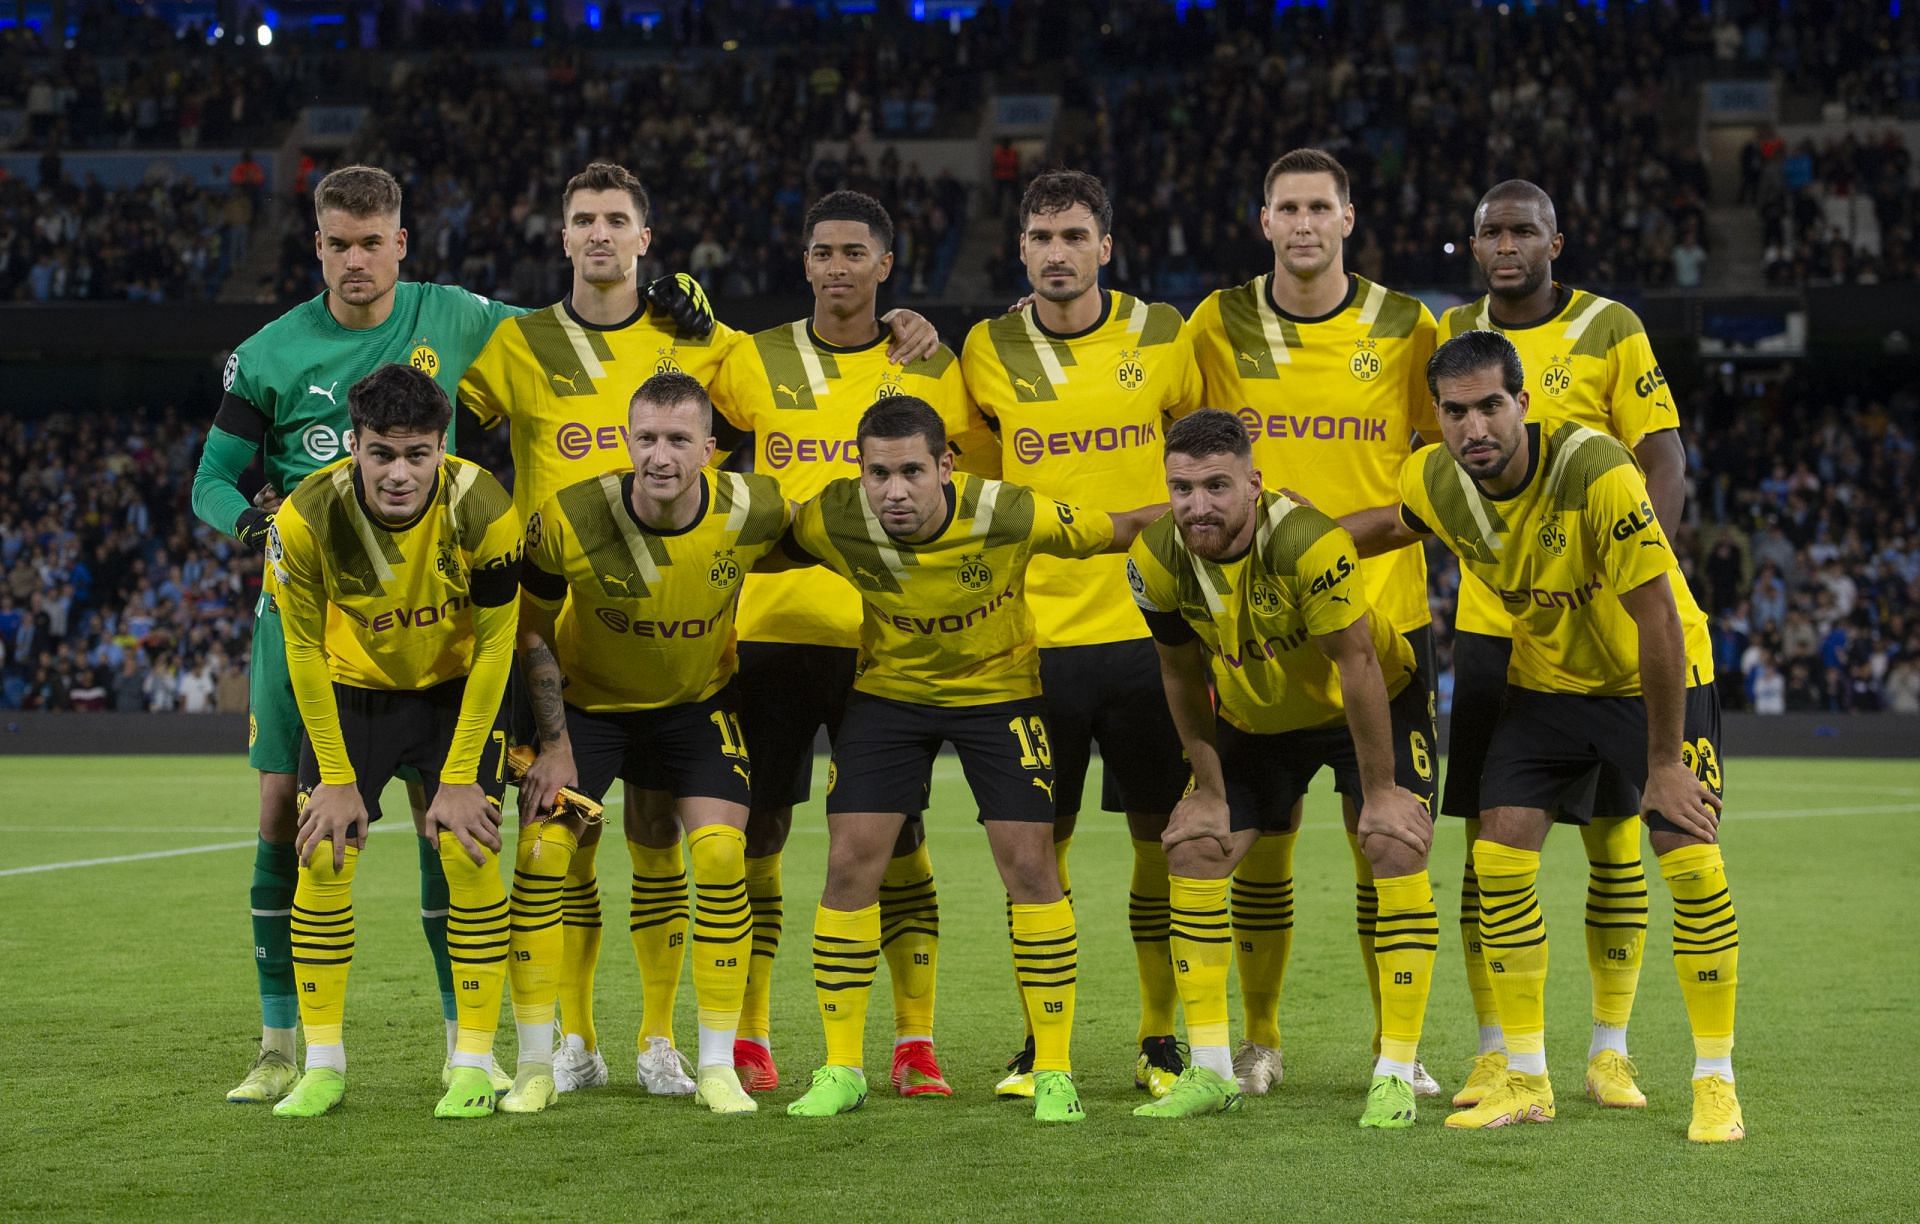 Dortmund are looking to win their fourth friendly in a row